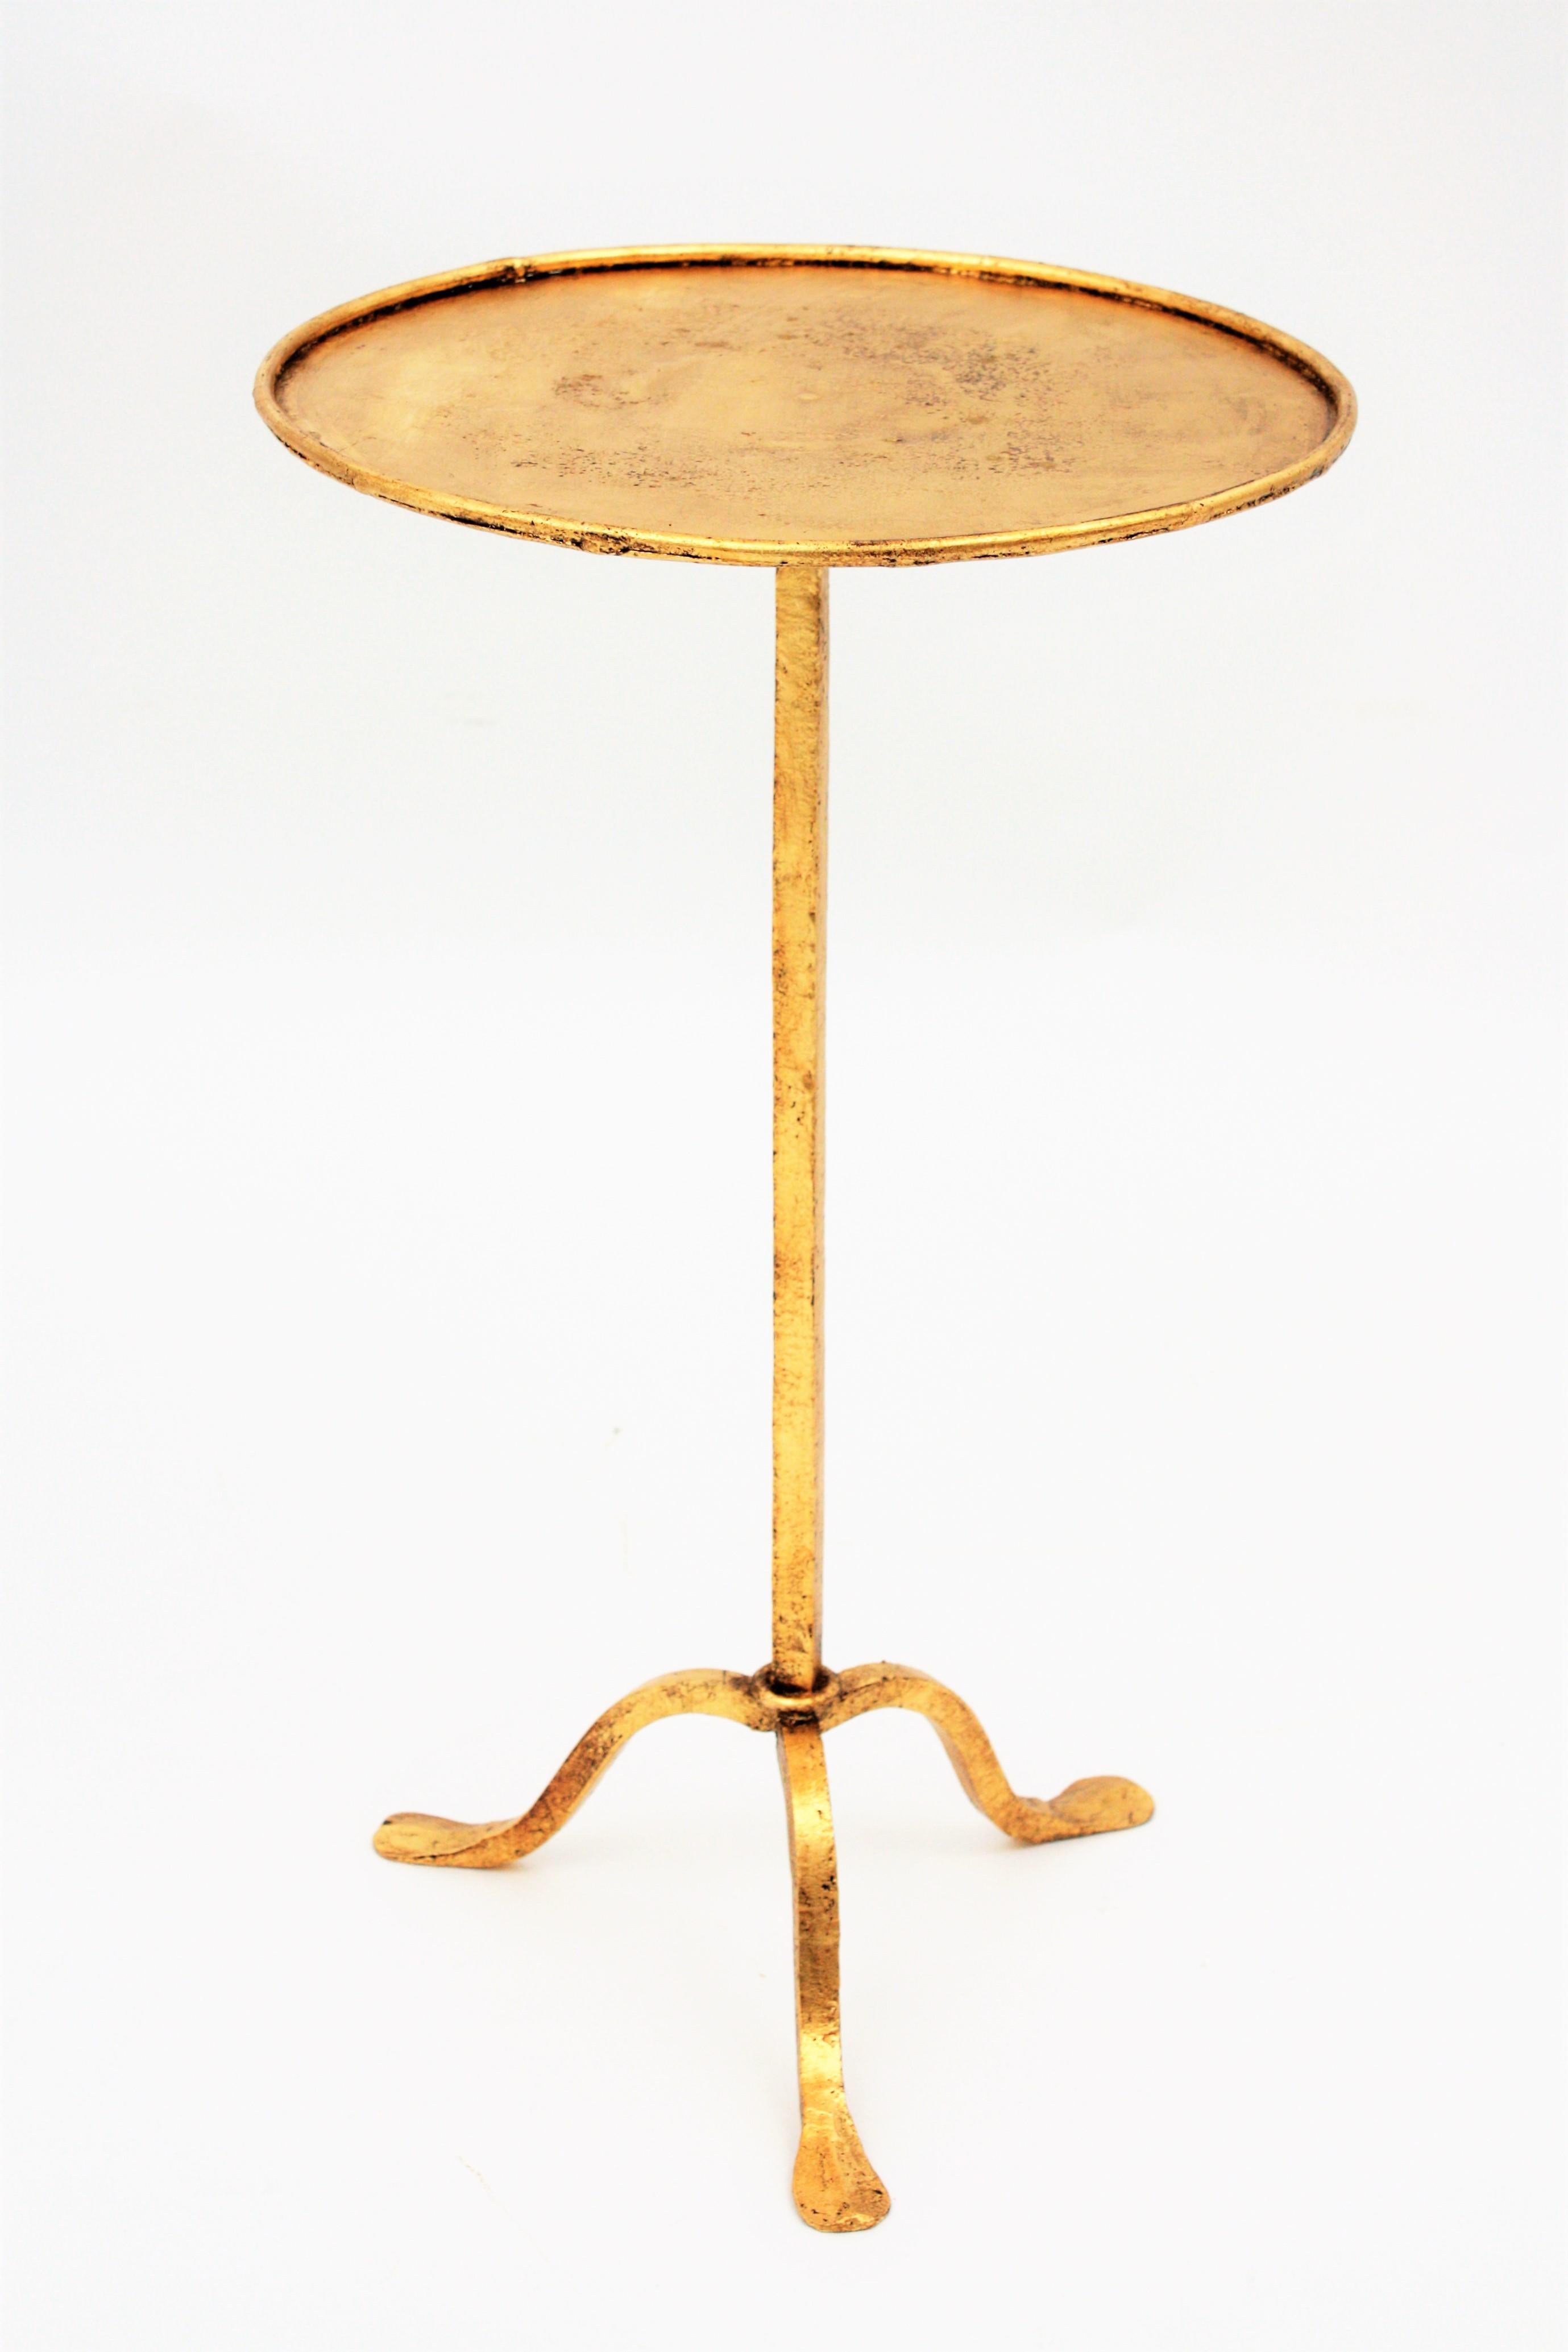 Beautiful hand-hammered gilt iron gueridon or drinks table on a tripod base. Very decorative as a side table, coffee table, Martini table, candle stand or pedestal. Spain, 1940s-1950s.

Avaliable other similar tables and gilt iron pieces in this